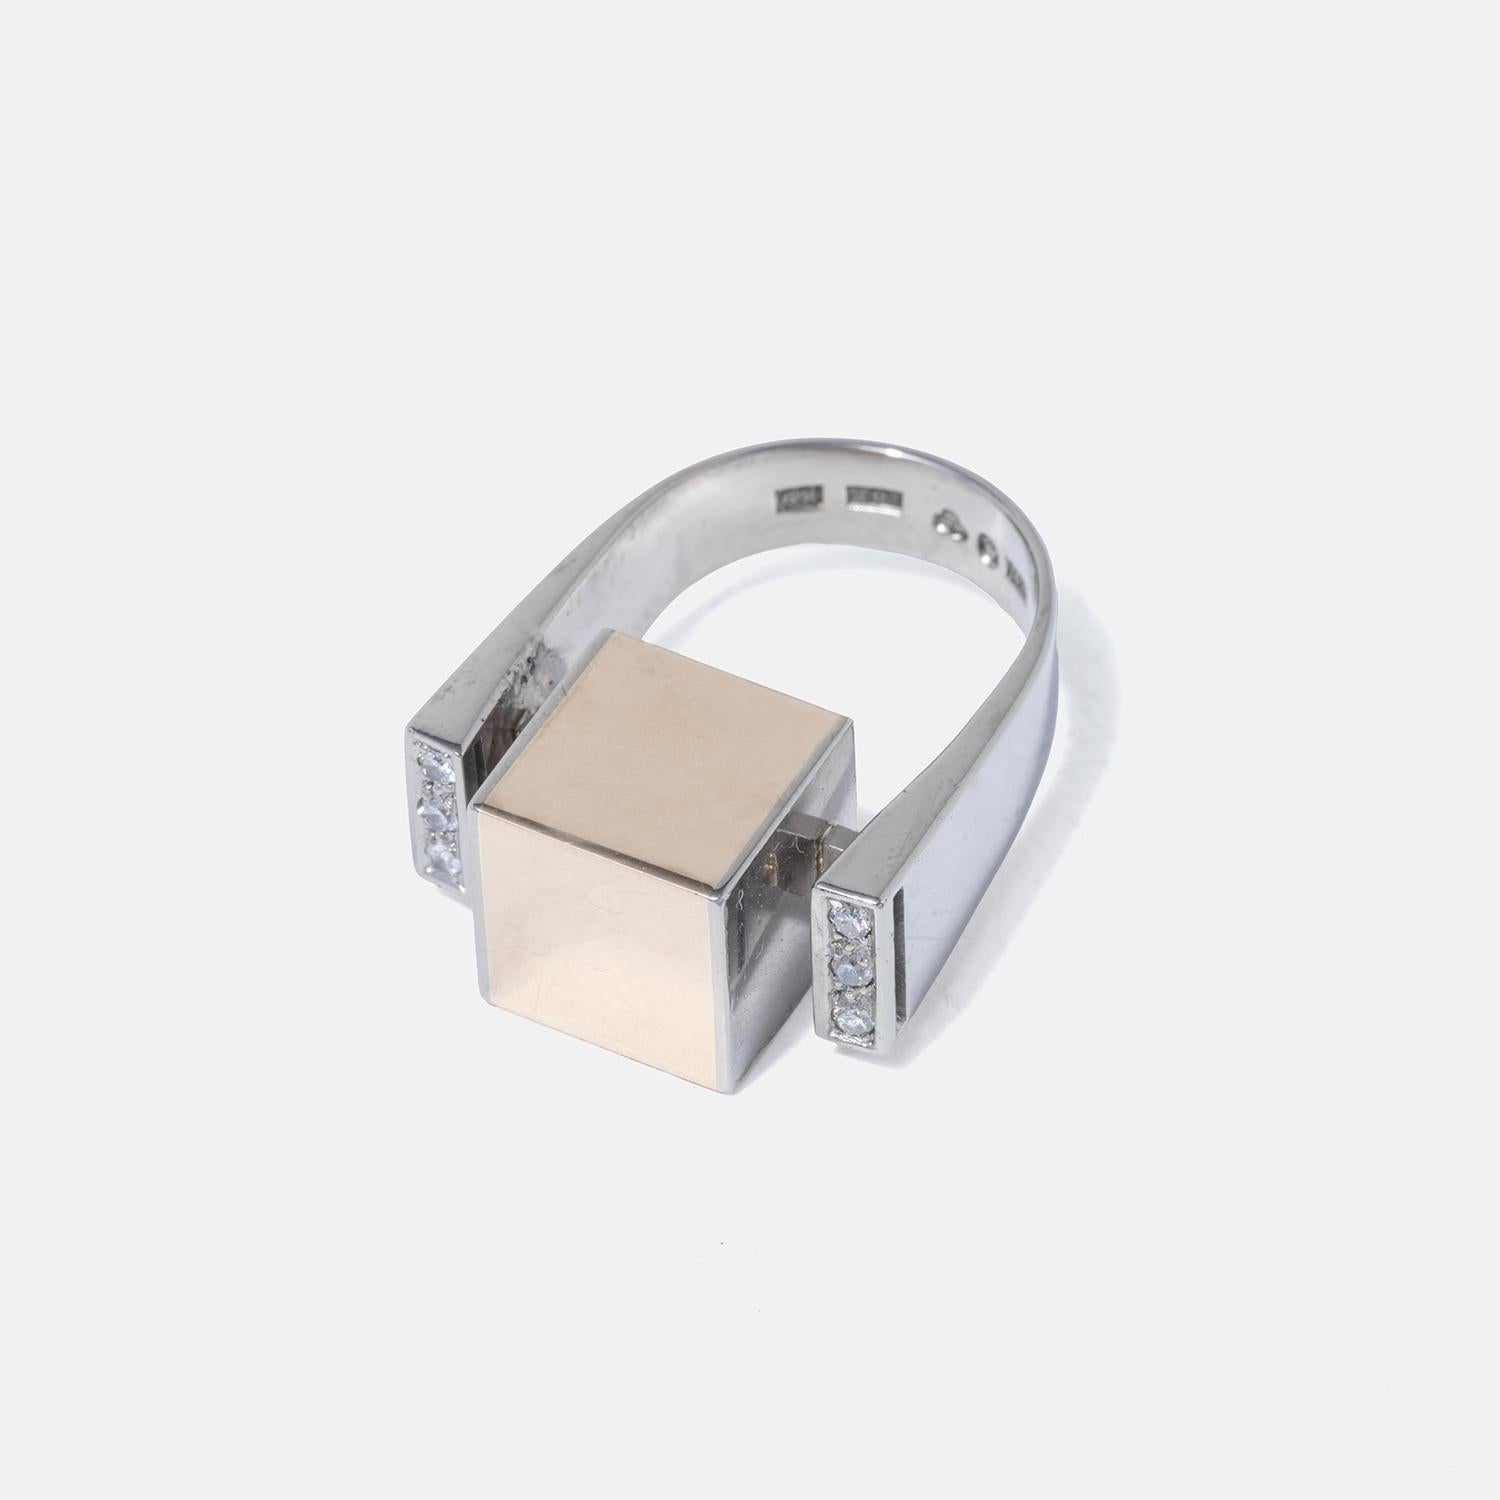 This ring made by the Swedish master Rey Urban showcases a modern design with a wide band that tapers from smaller to wider, crafted from white gold and featuring a prominent, flat square adornment made of polished red gold. Diamonds embellish the